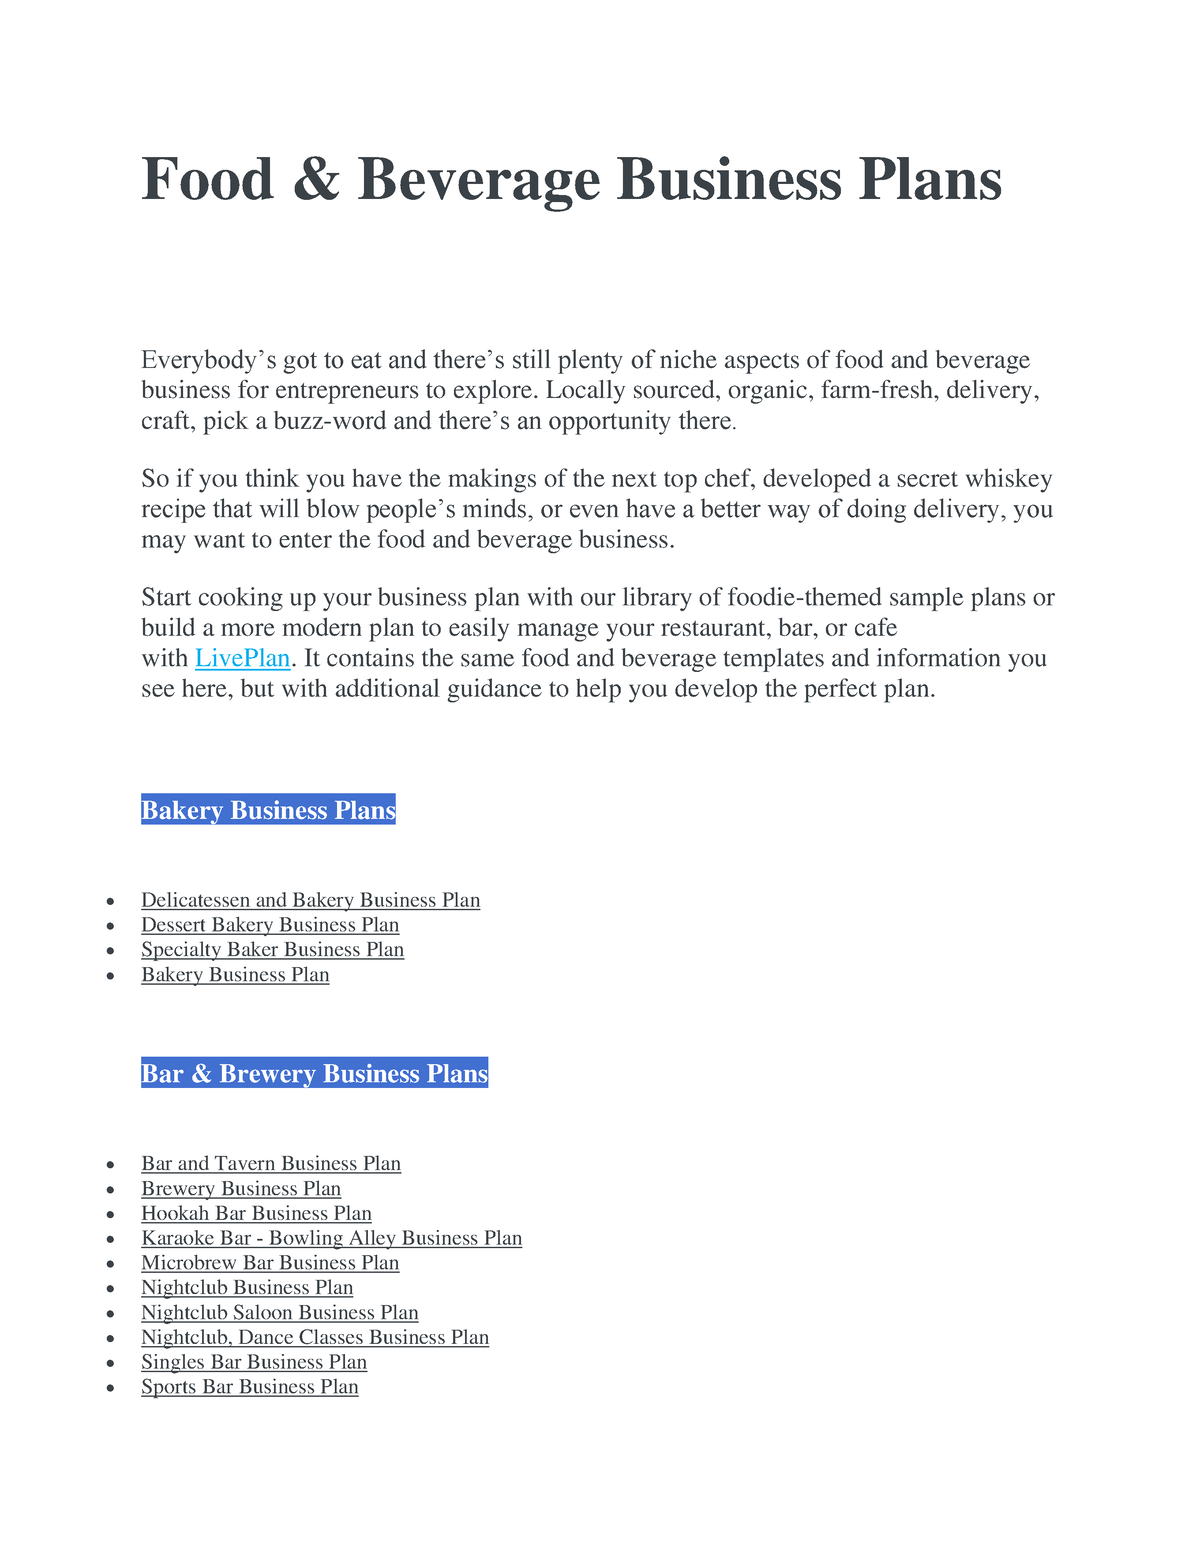 example of food and beverage business plan